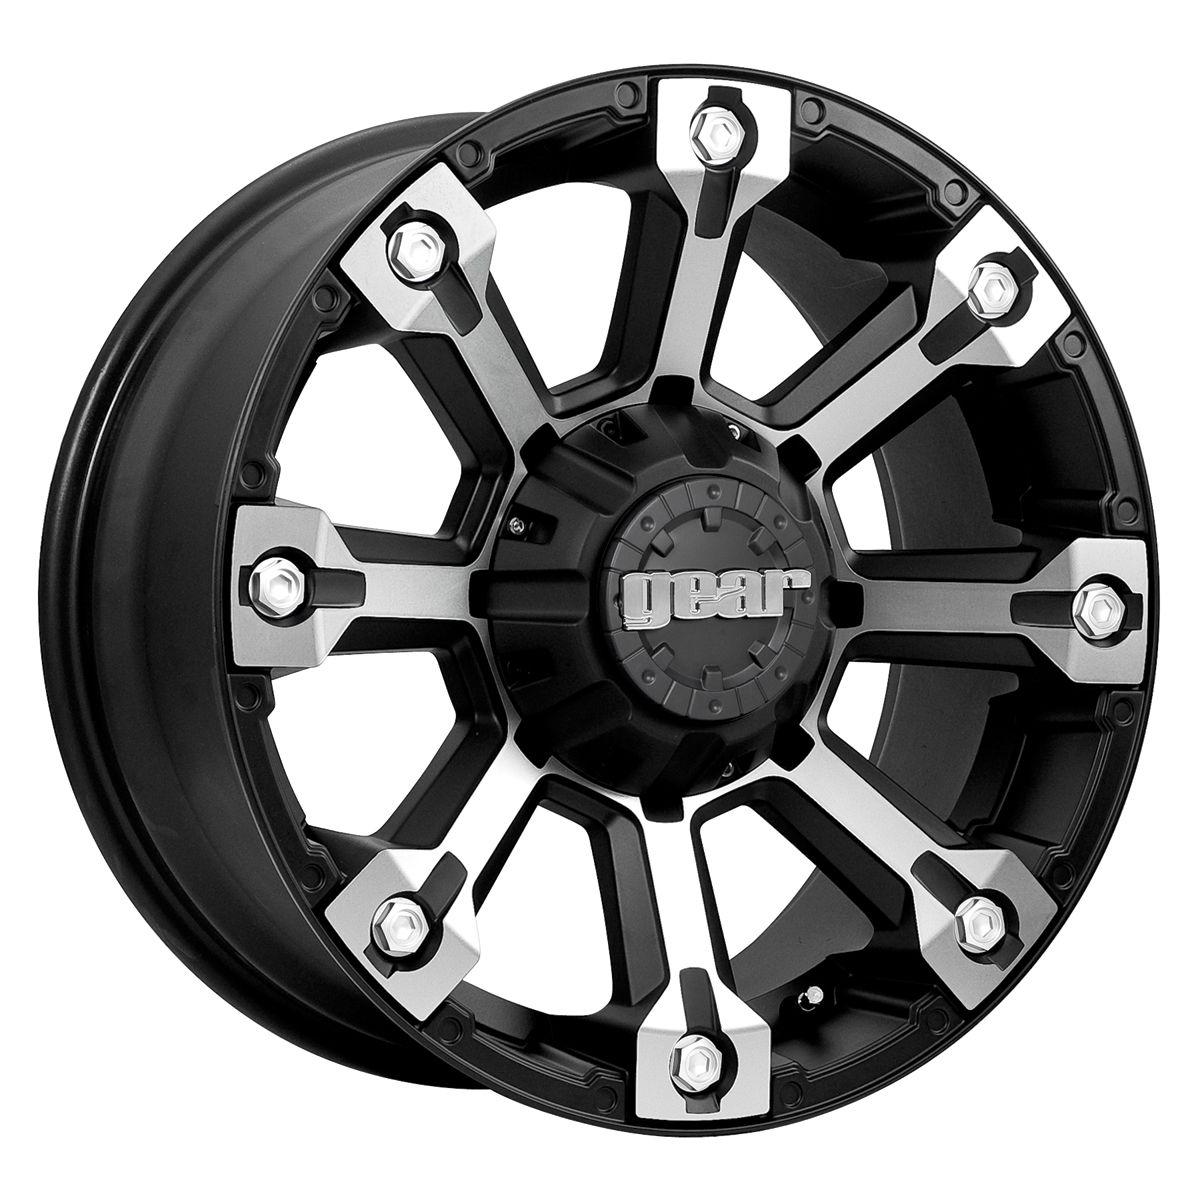 719MB Backcountry 20X9 (6-135) Machined w/ Carbon Black Accents